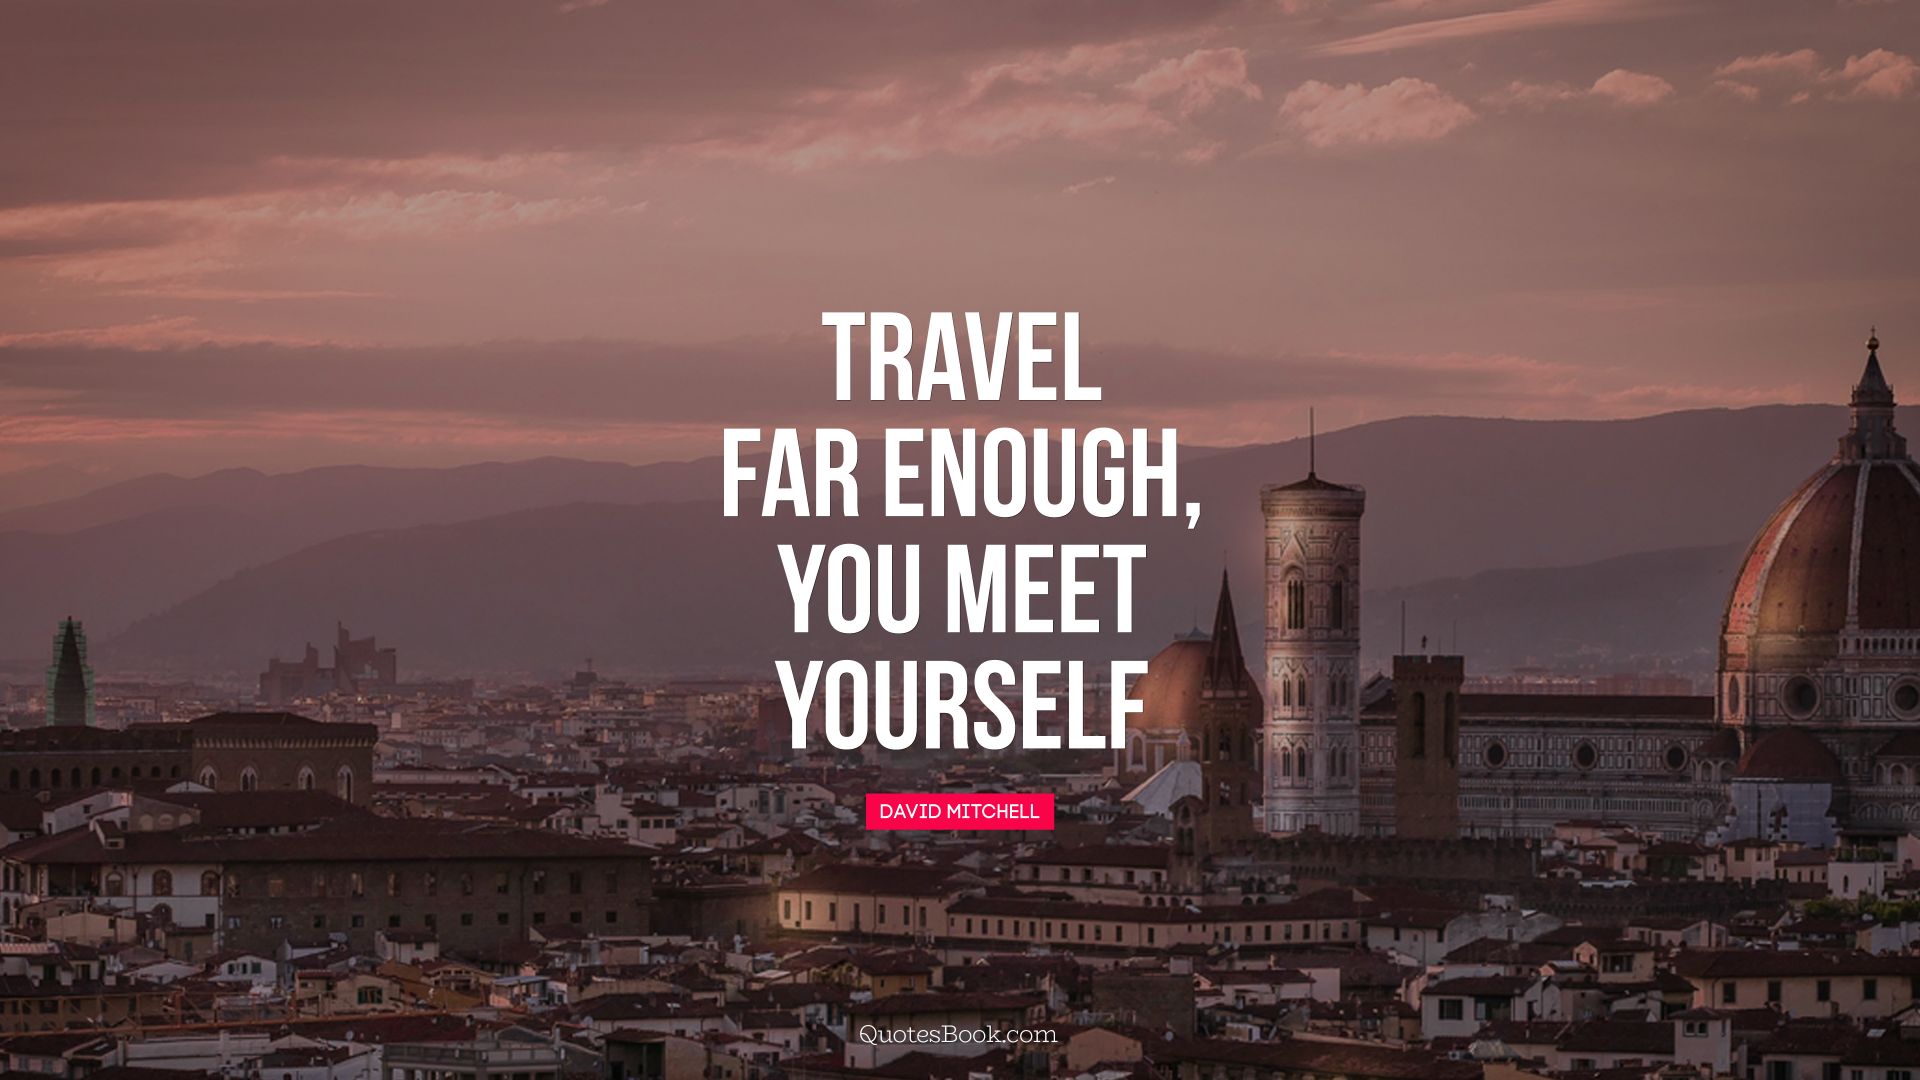 Travel far enough, you meet yourself. - Quote by David Mitchell